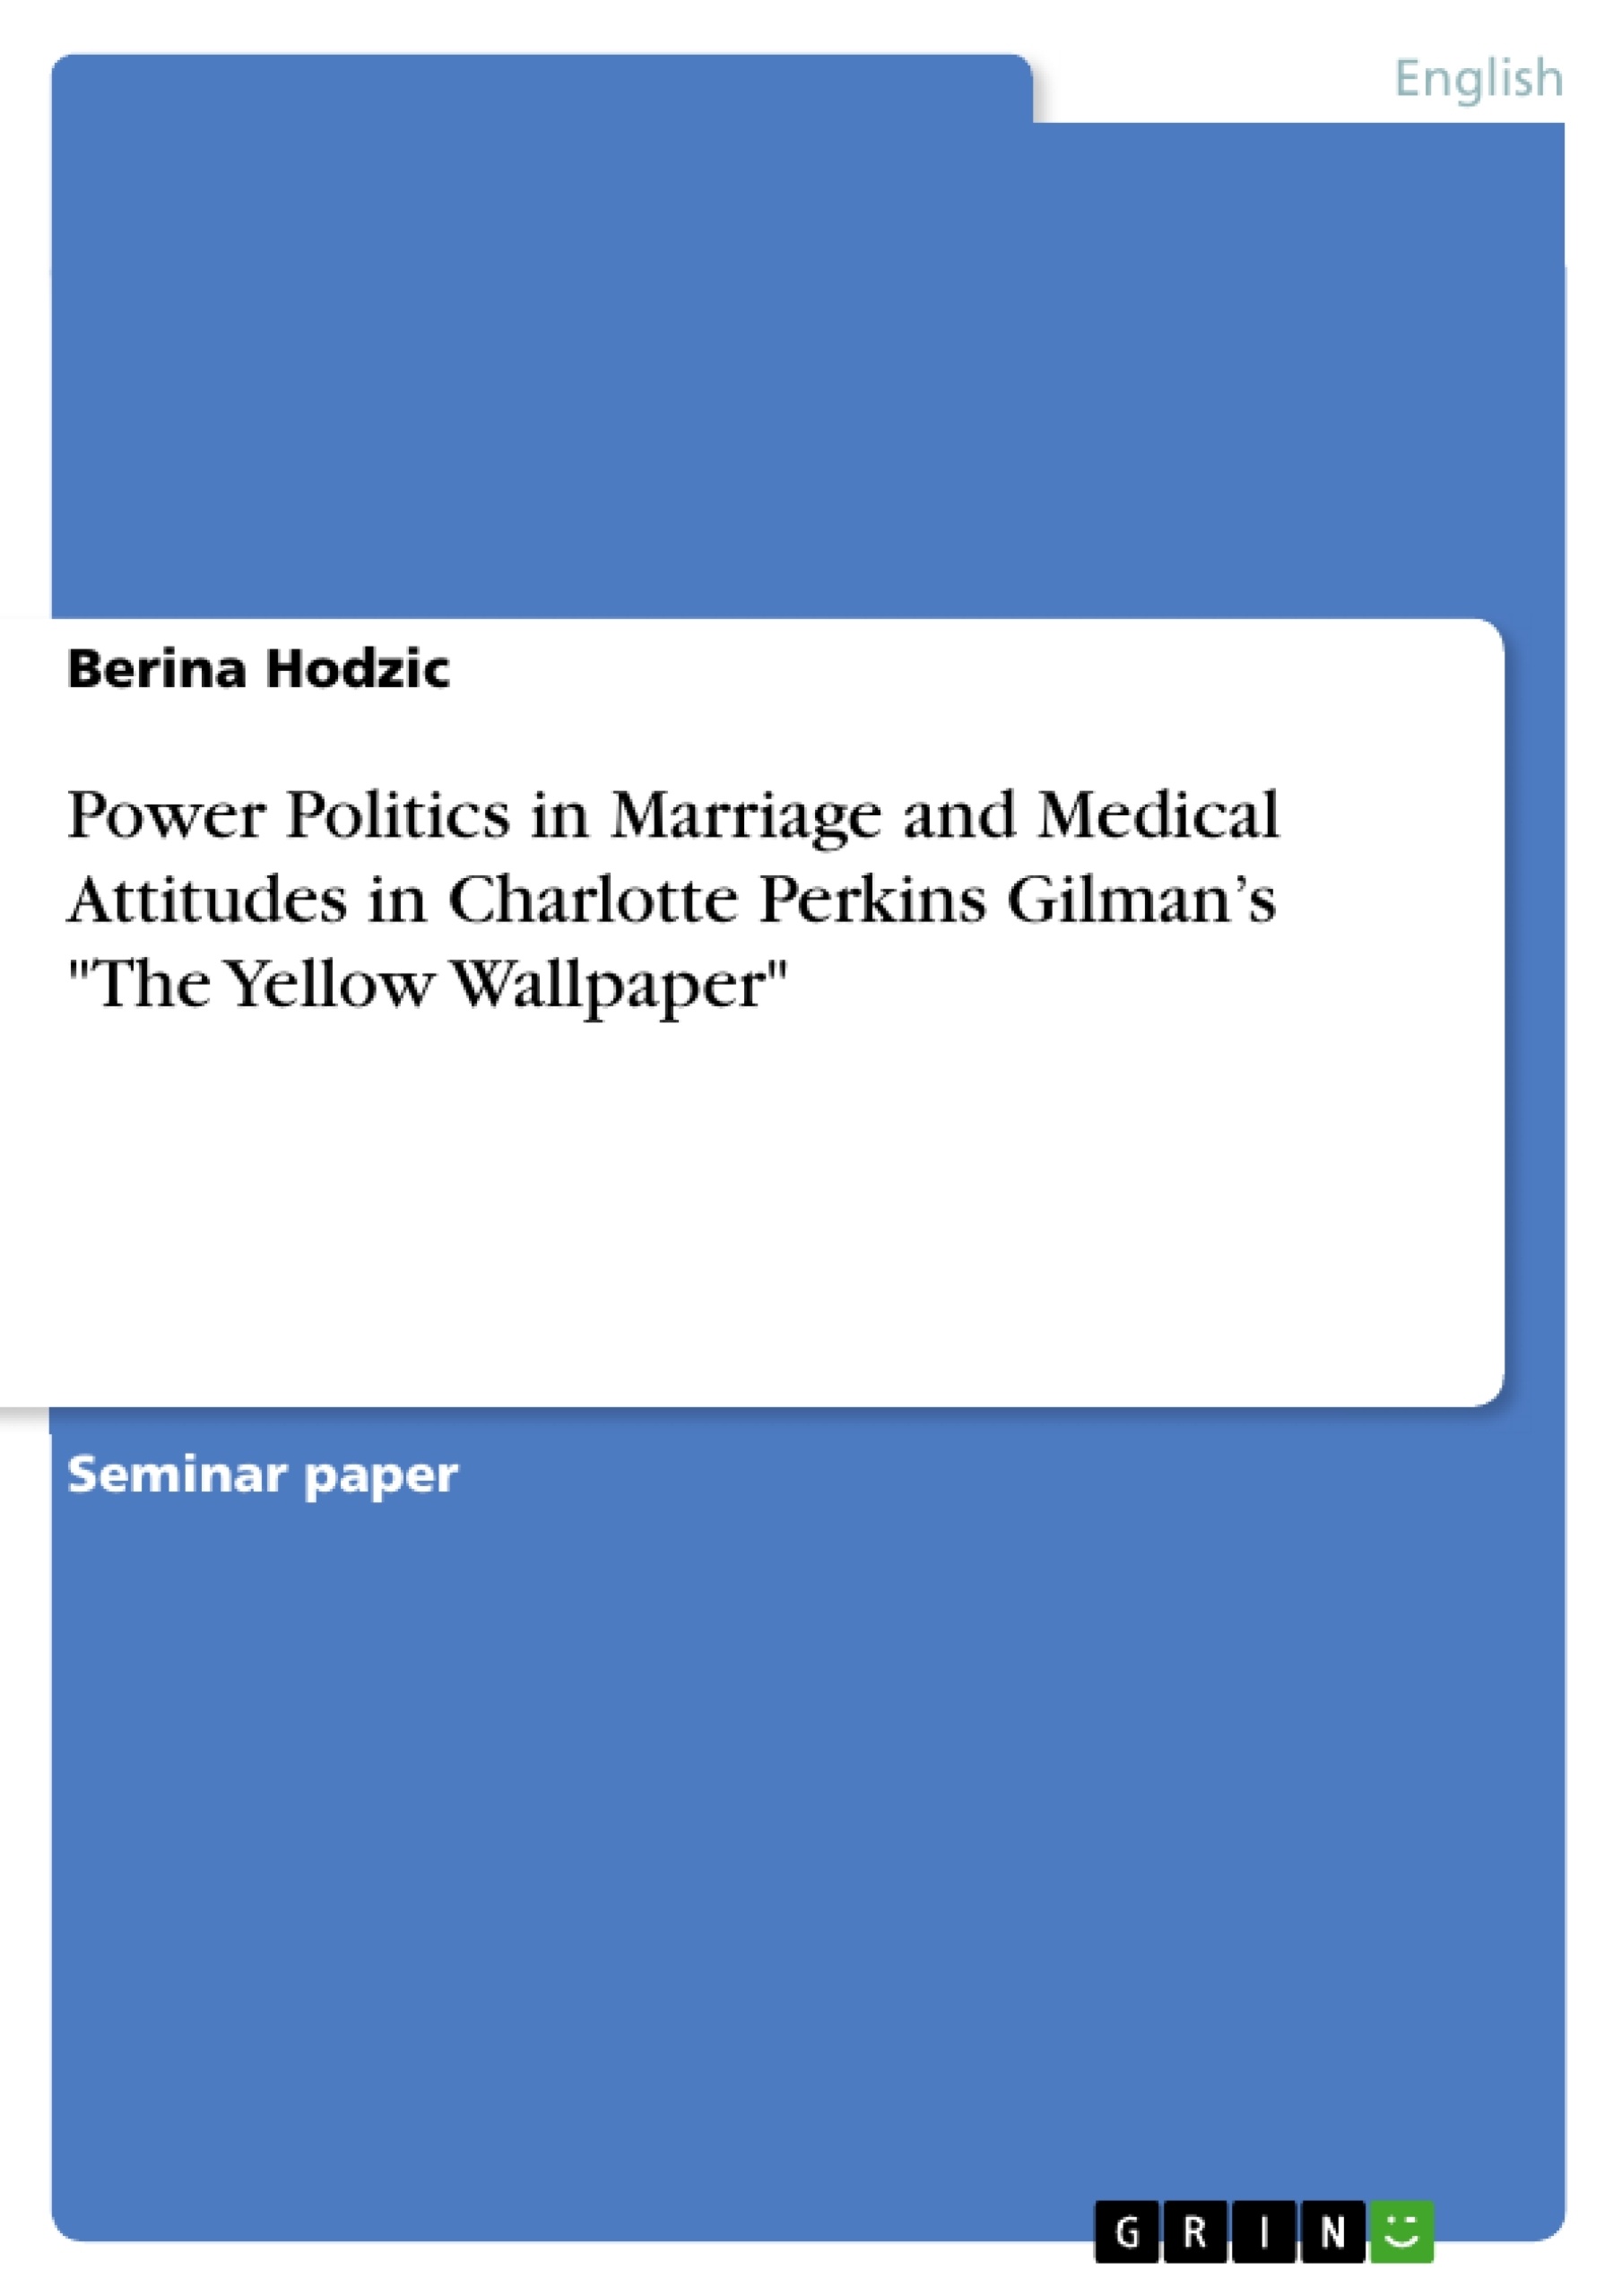 Title: Power Politics in Marriage and Medical Attitudes in Charlotte Perkins Gilman’s "The Yellow Wallpaper"